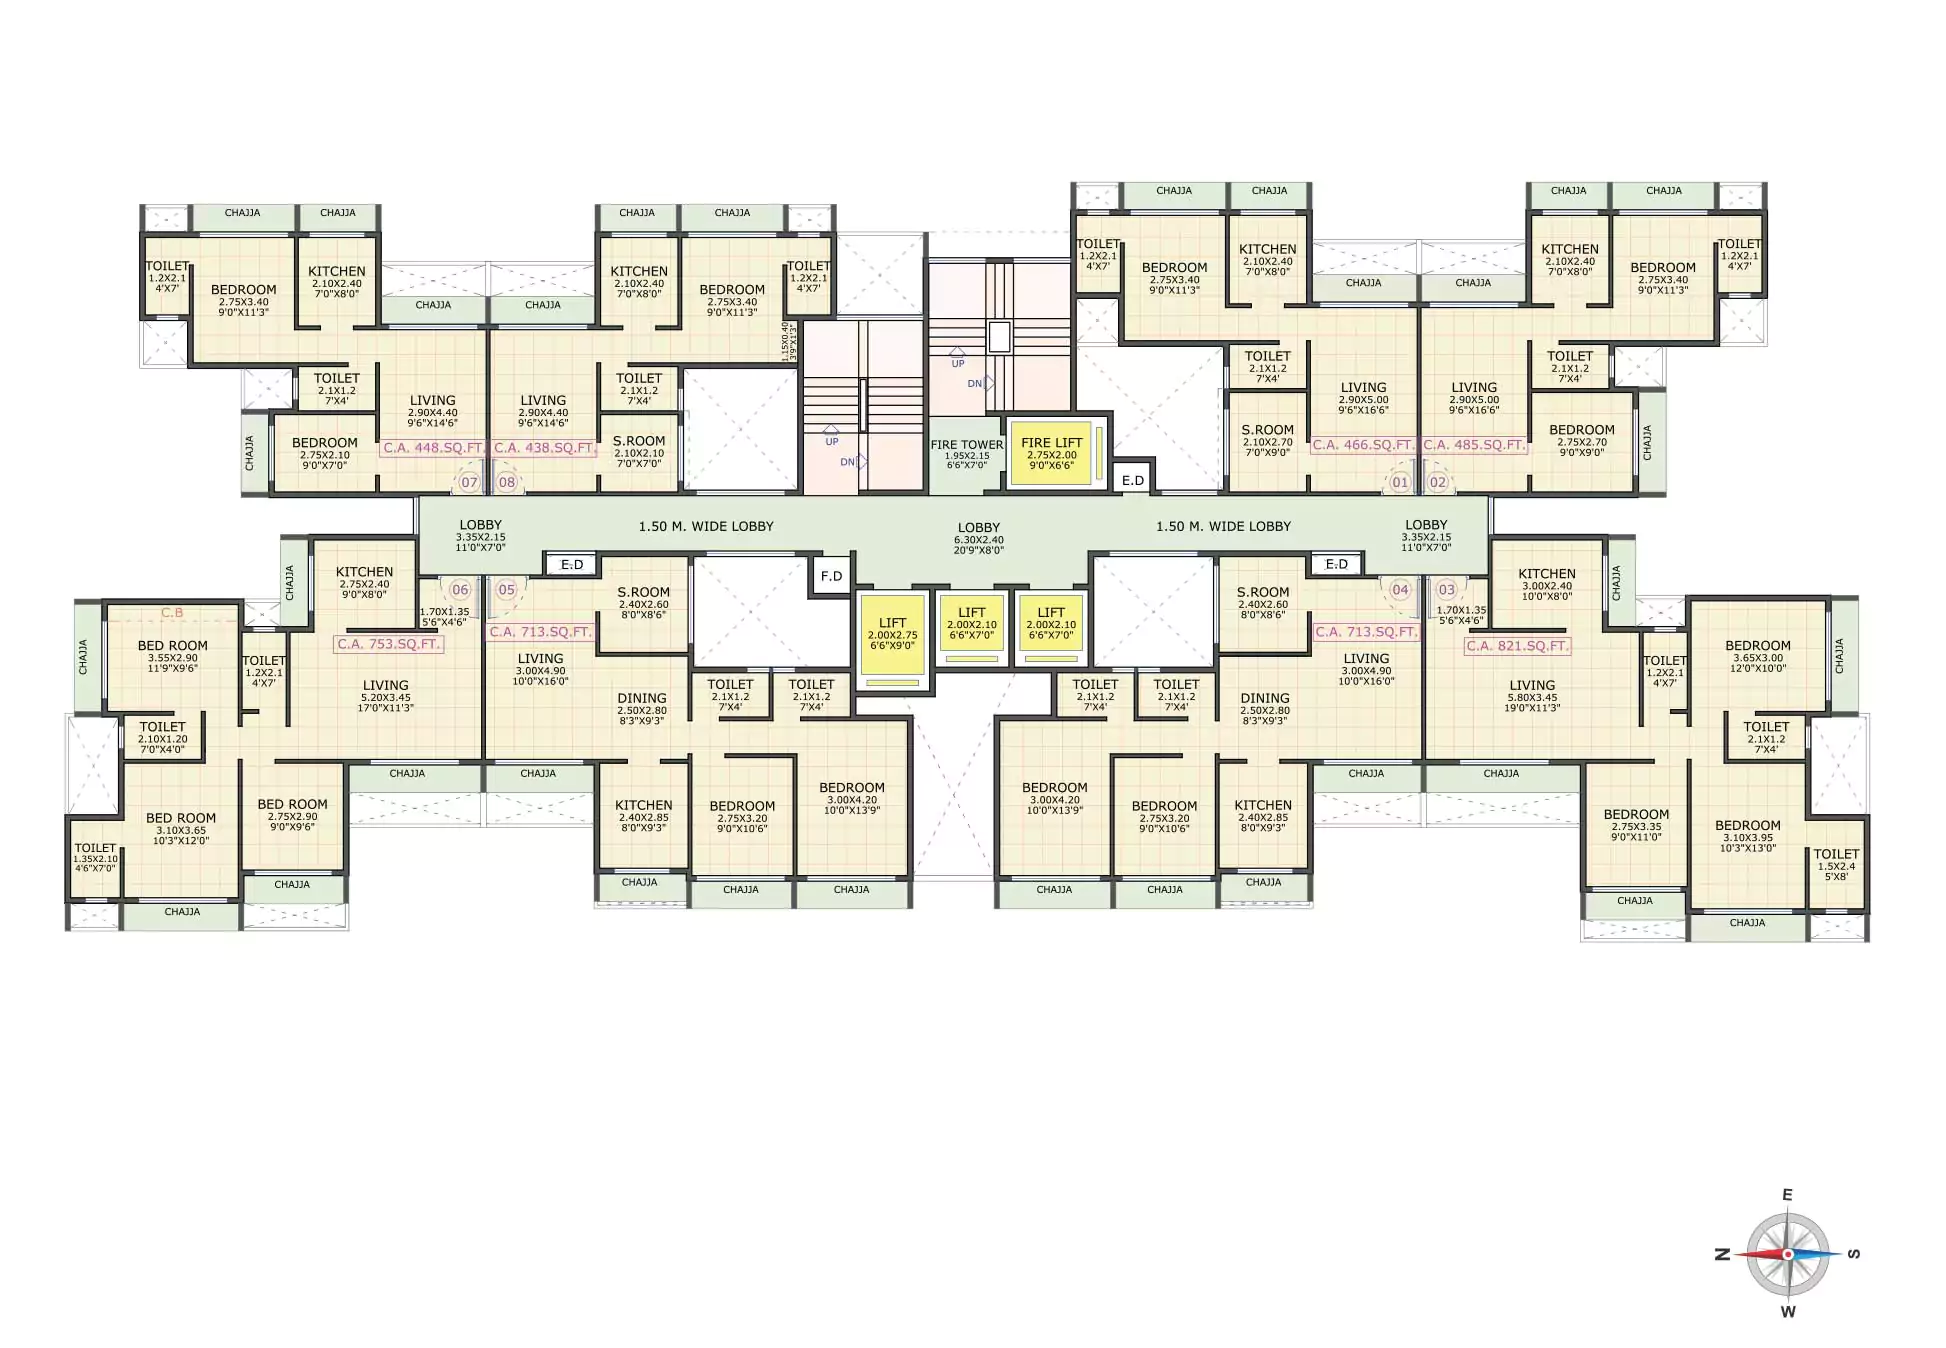 Typical Floor Plan (20th, 21st, 23rd, 24th & 25th) - Gami Jade